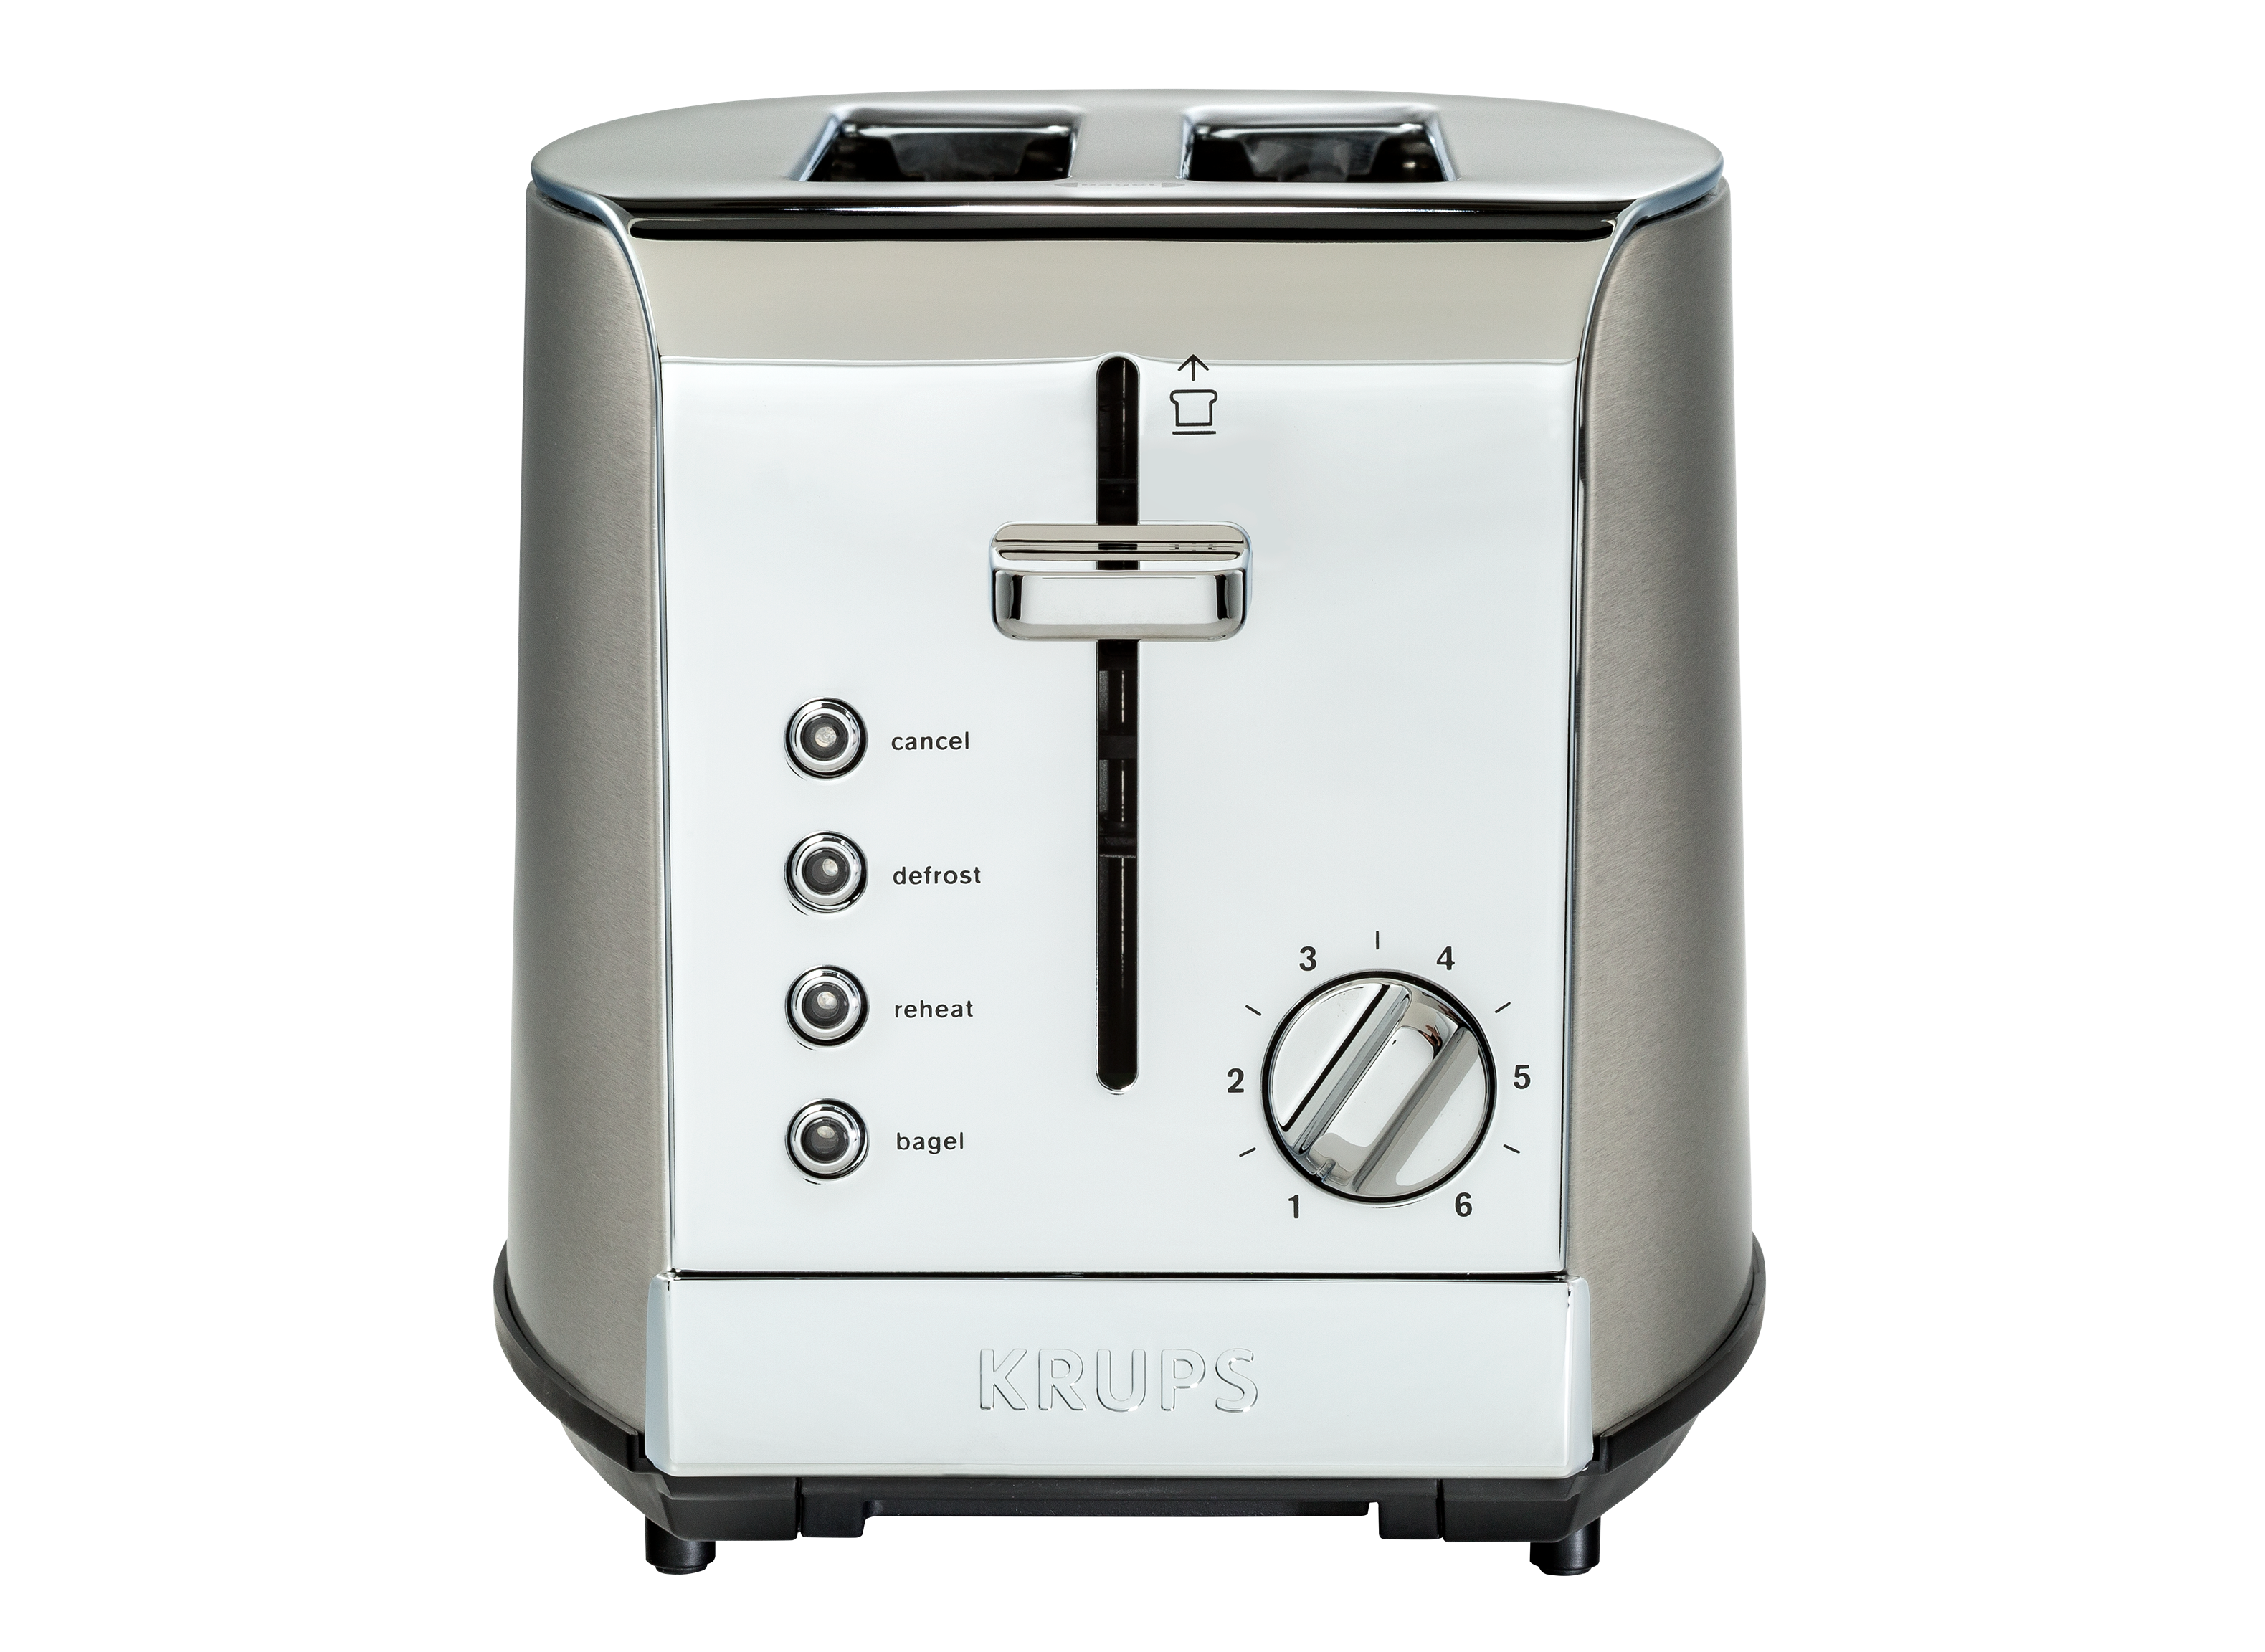 Krups KH732D50 2-Slice Toaster & Toaster Oven Review - Consumer